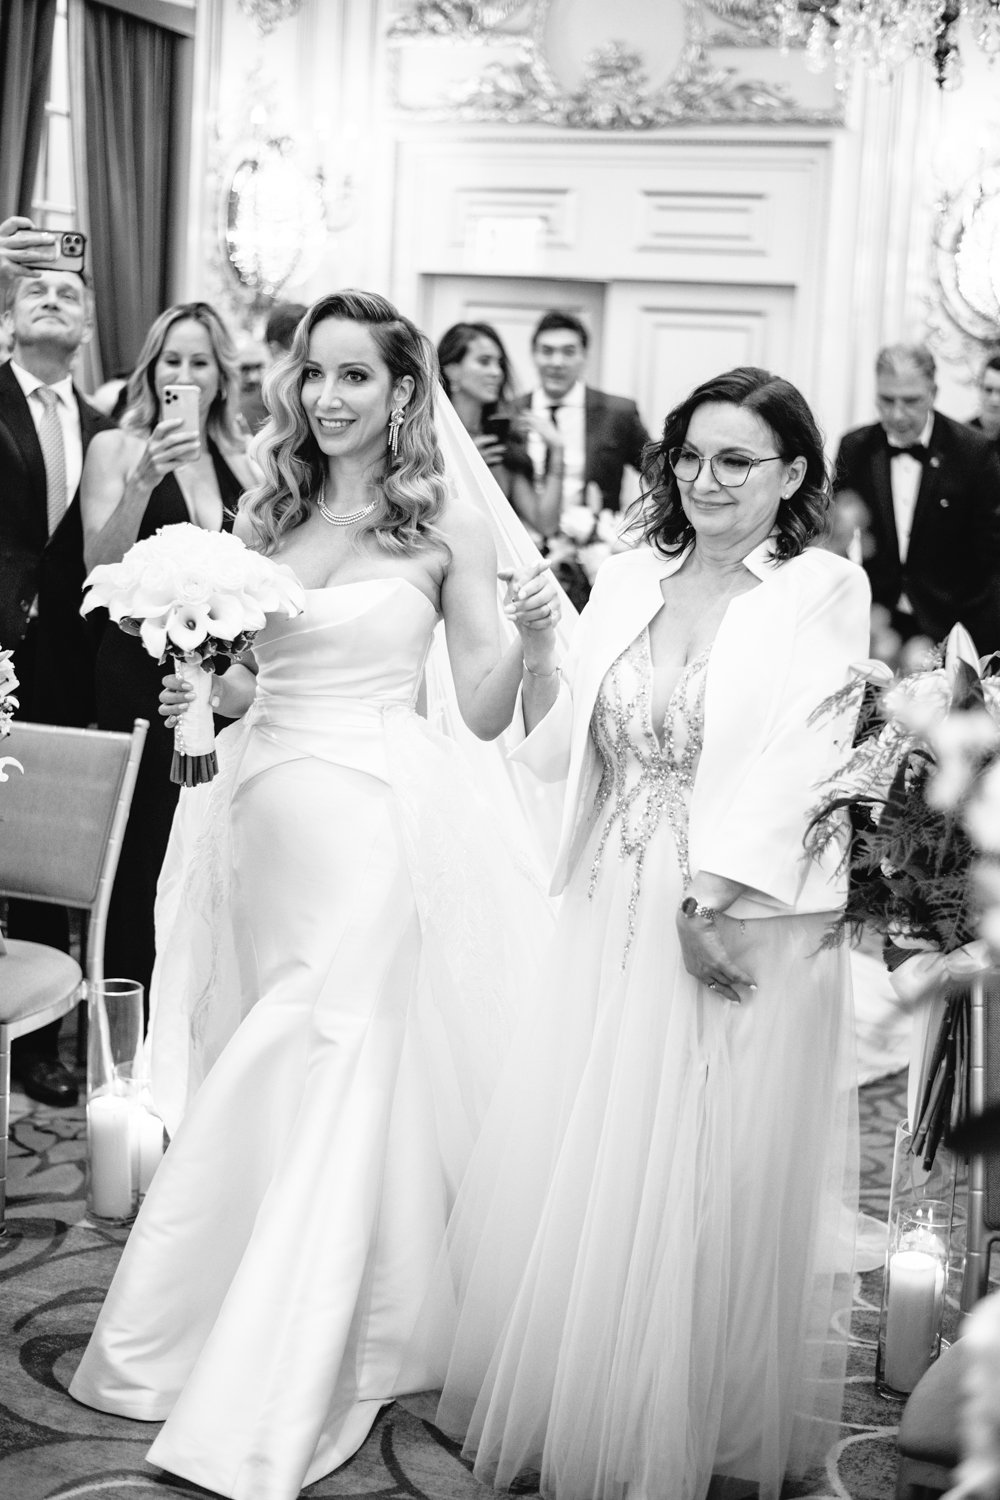 Bride and her mother walk down the aisle smiling and holding hands. The wedding guests are standing and smiling.

Manhattan Luxury Wedding. New York Luxury Wedding Photographer. Wedding in Manhattan. NYC Luxury Wedding.